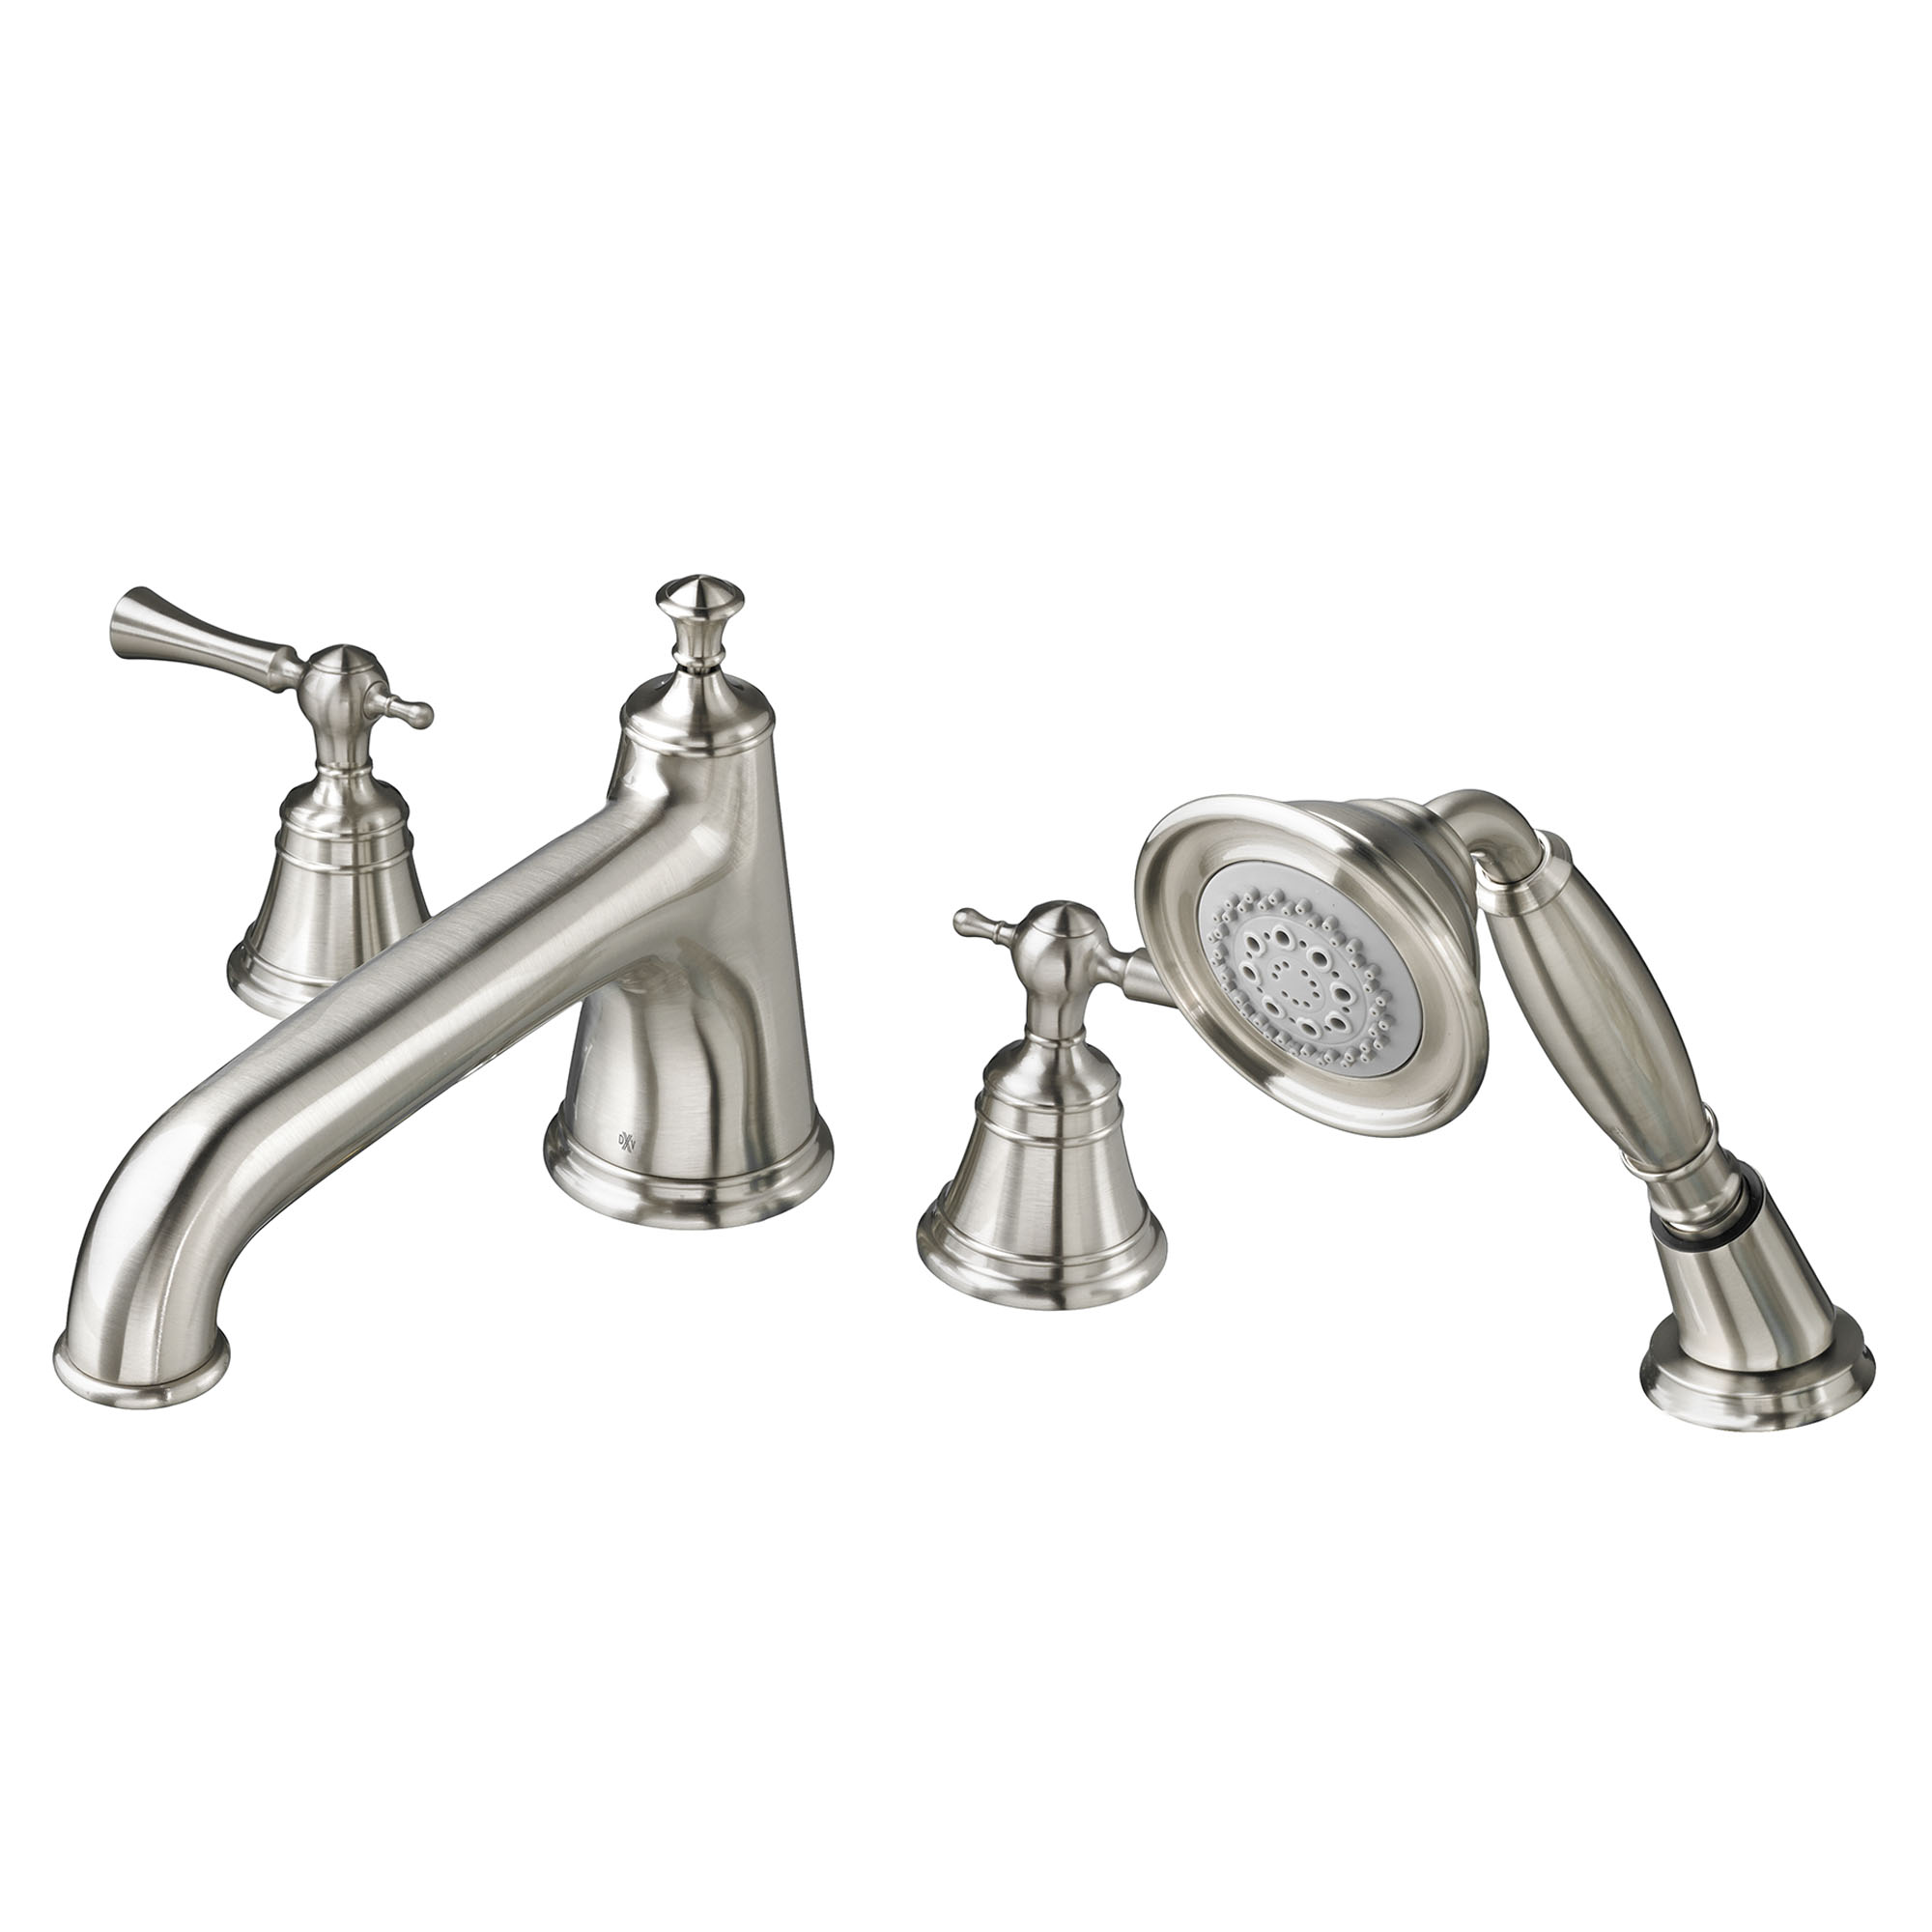 Randall 2-Handle Deck Mount Bathtub Faucet with Hand Shower and Lever Handles